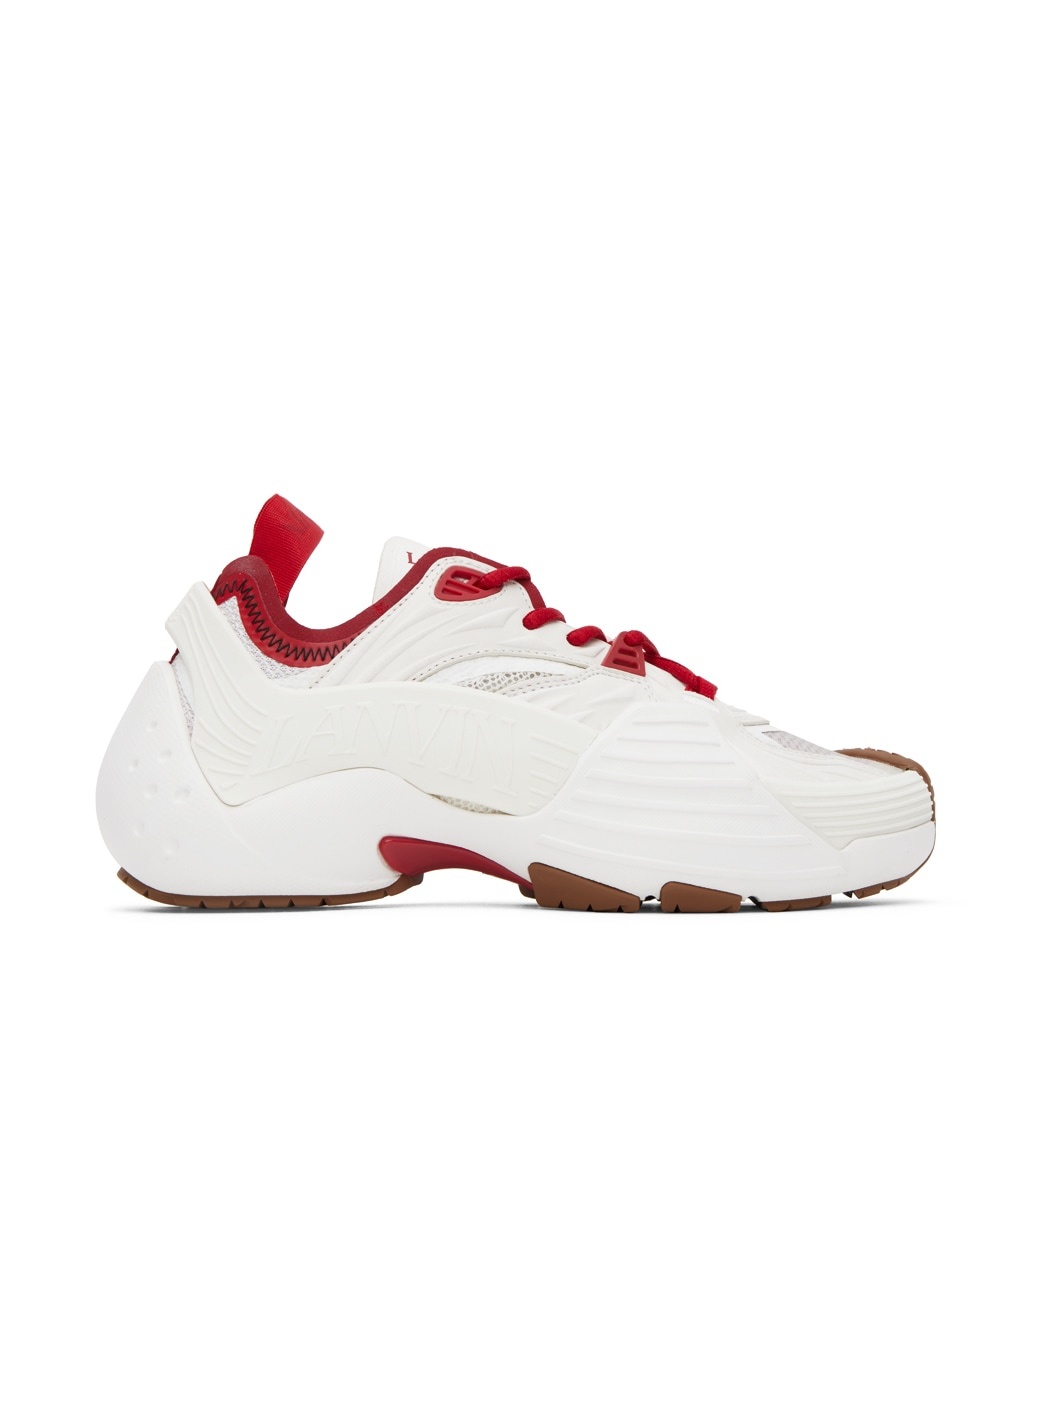 SSENSE Exclusive Red & White Flash-X Sneakers - 1